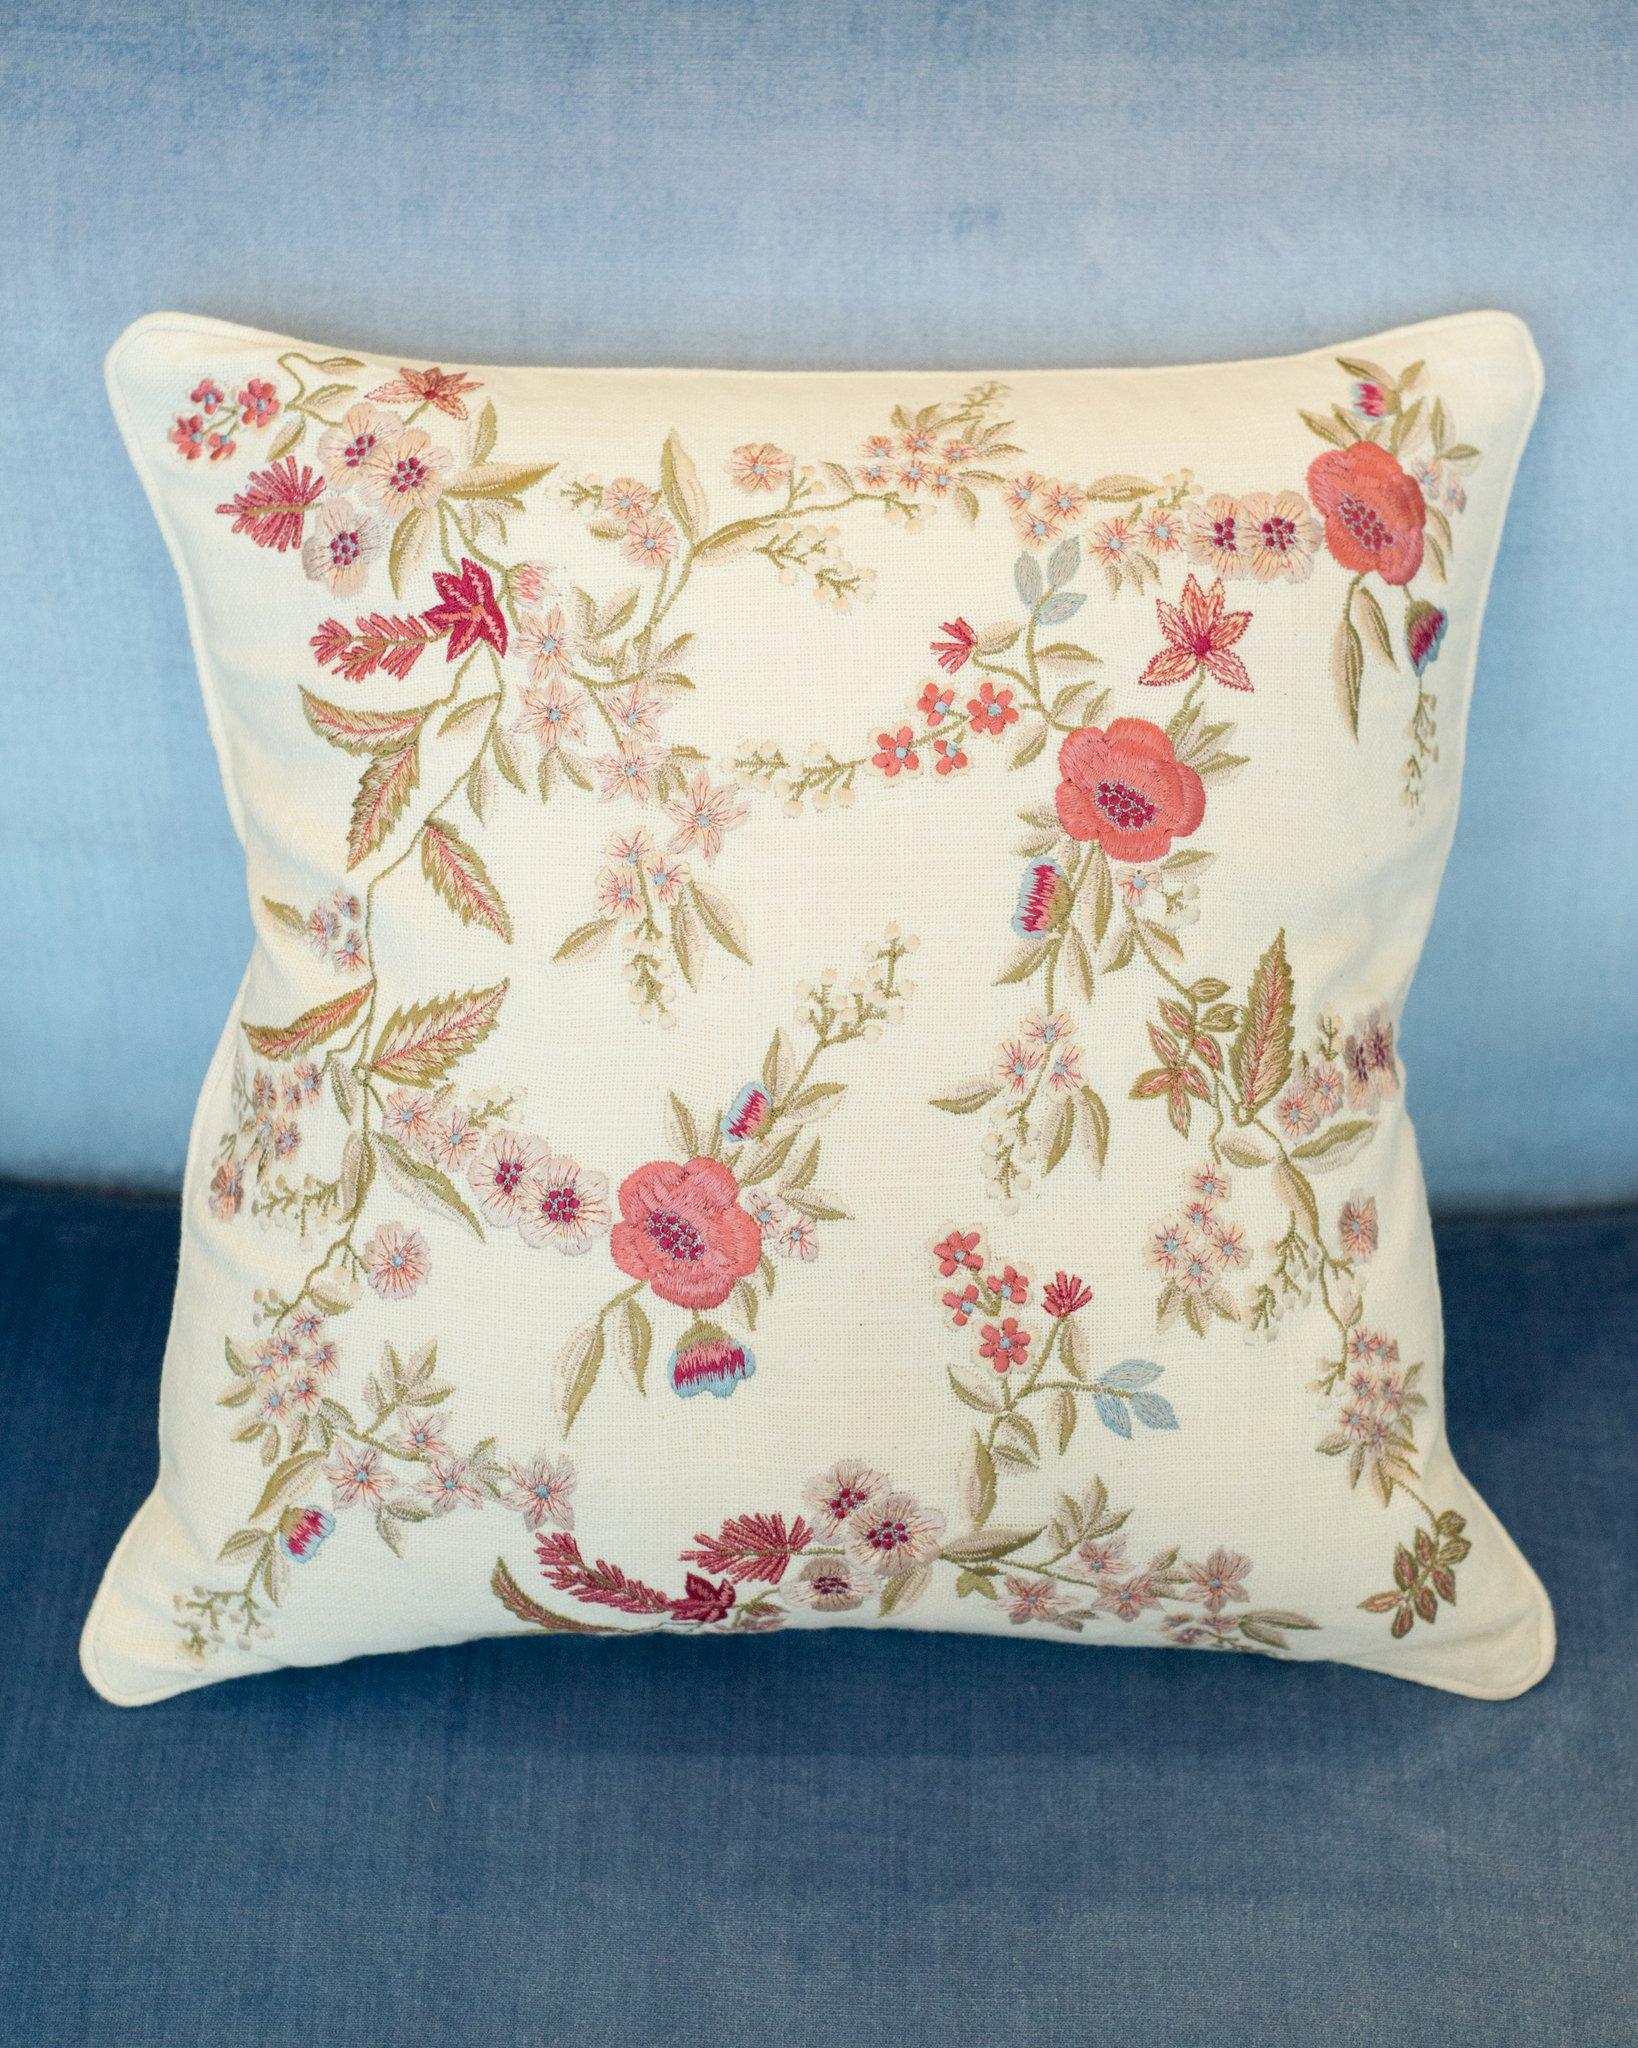 A pair of cotton cushions from Anke Dreschel featuring ornate floral embroidery, square shape and concealed rear zip fastening. Filled with 100% Canadian feather and down.